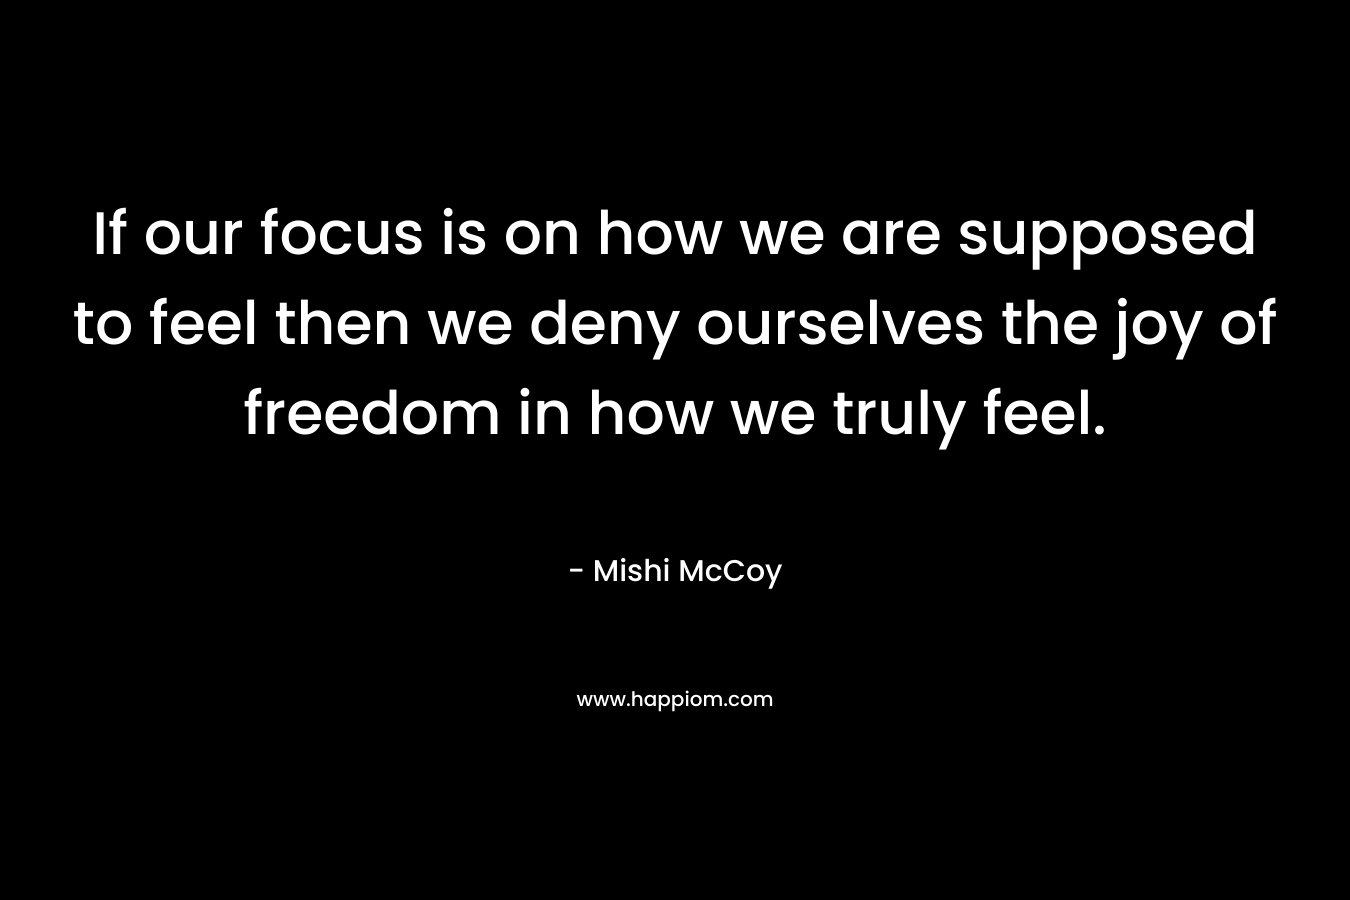 If our focus is on how we are supposed to feel then we deny ourselves the joy of freedom in how we truly feel. – Mishi McCoy